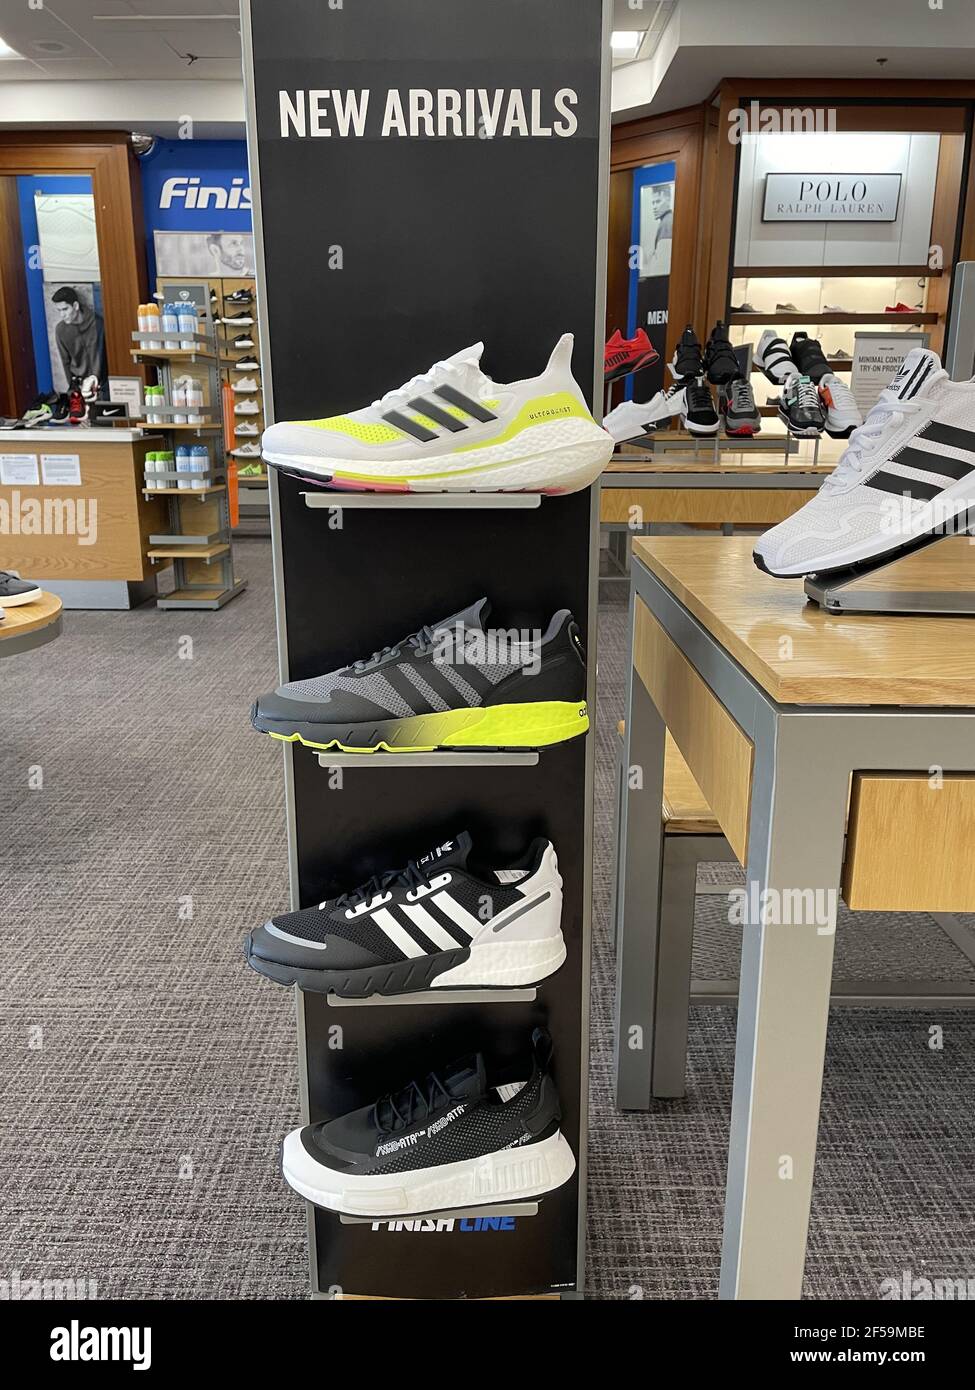 pandilla Convención saldar FRESNO, UNITED STATES - Mar 24, 2021: A photo of the New Arrivals of Adidas  Shoes for Men March 24, 2021 Stock Photo - Alamy